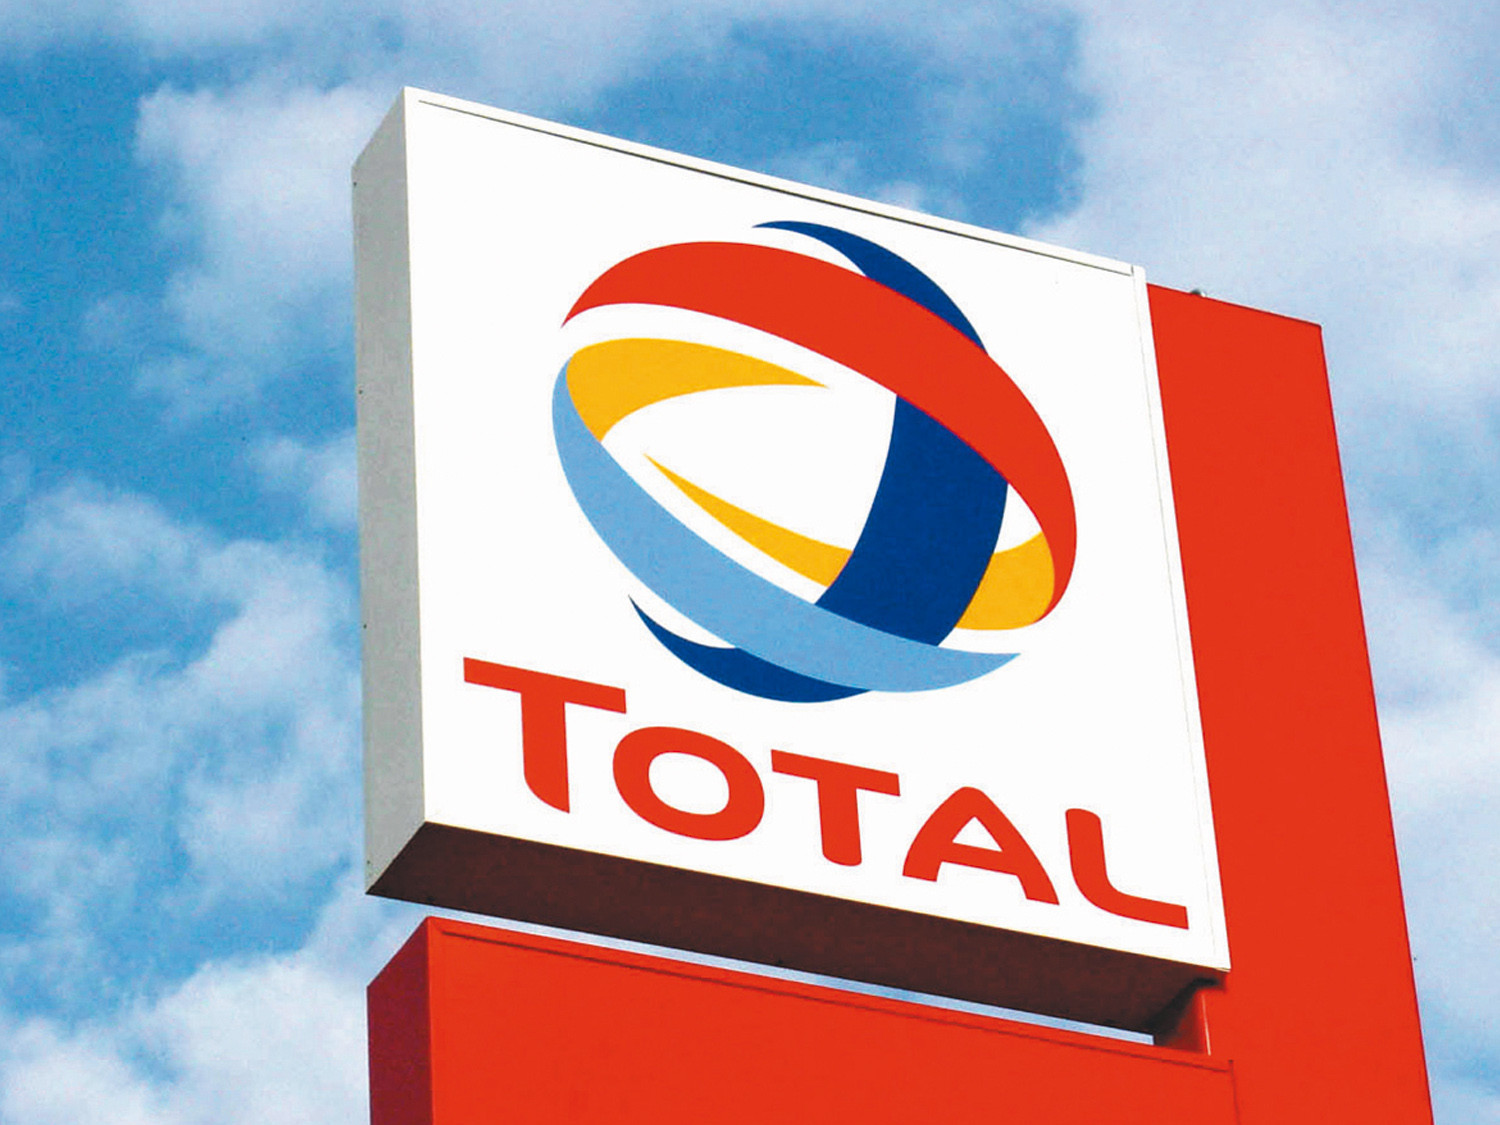 Energy company Total have revealed they will not sponsor Paris 2024 because of fears of the negative publicity it could generate   ©Getty Images